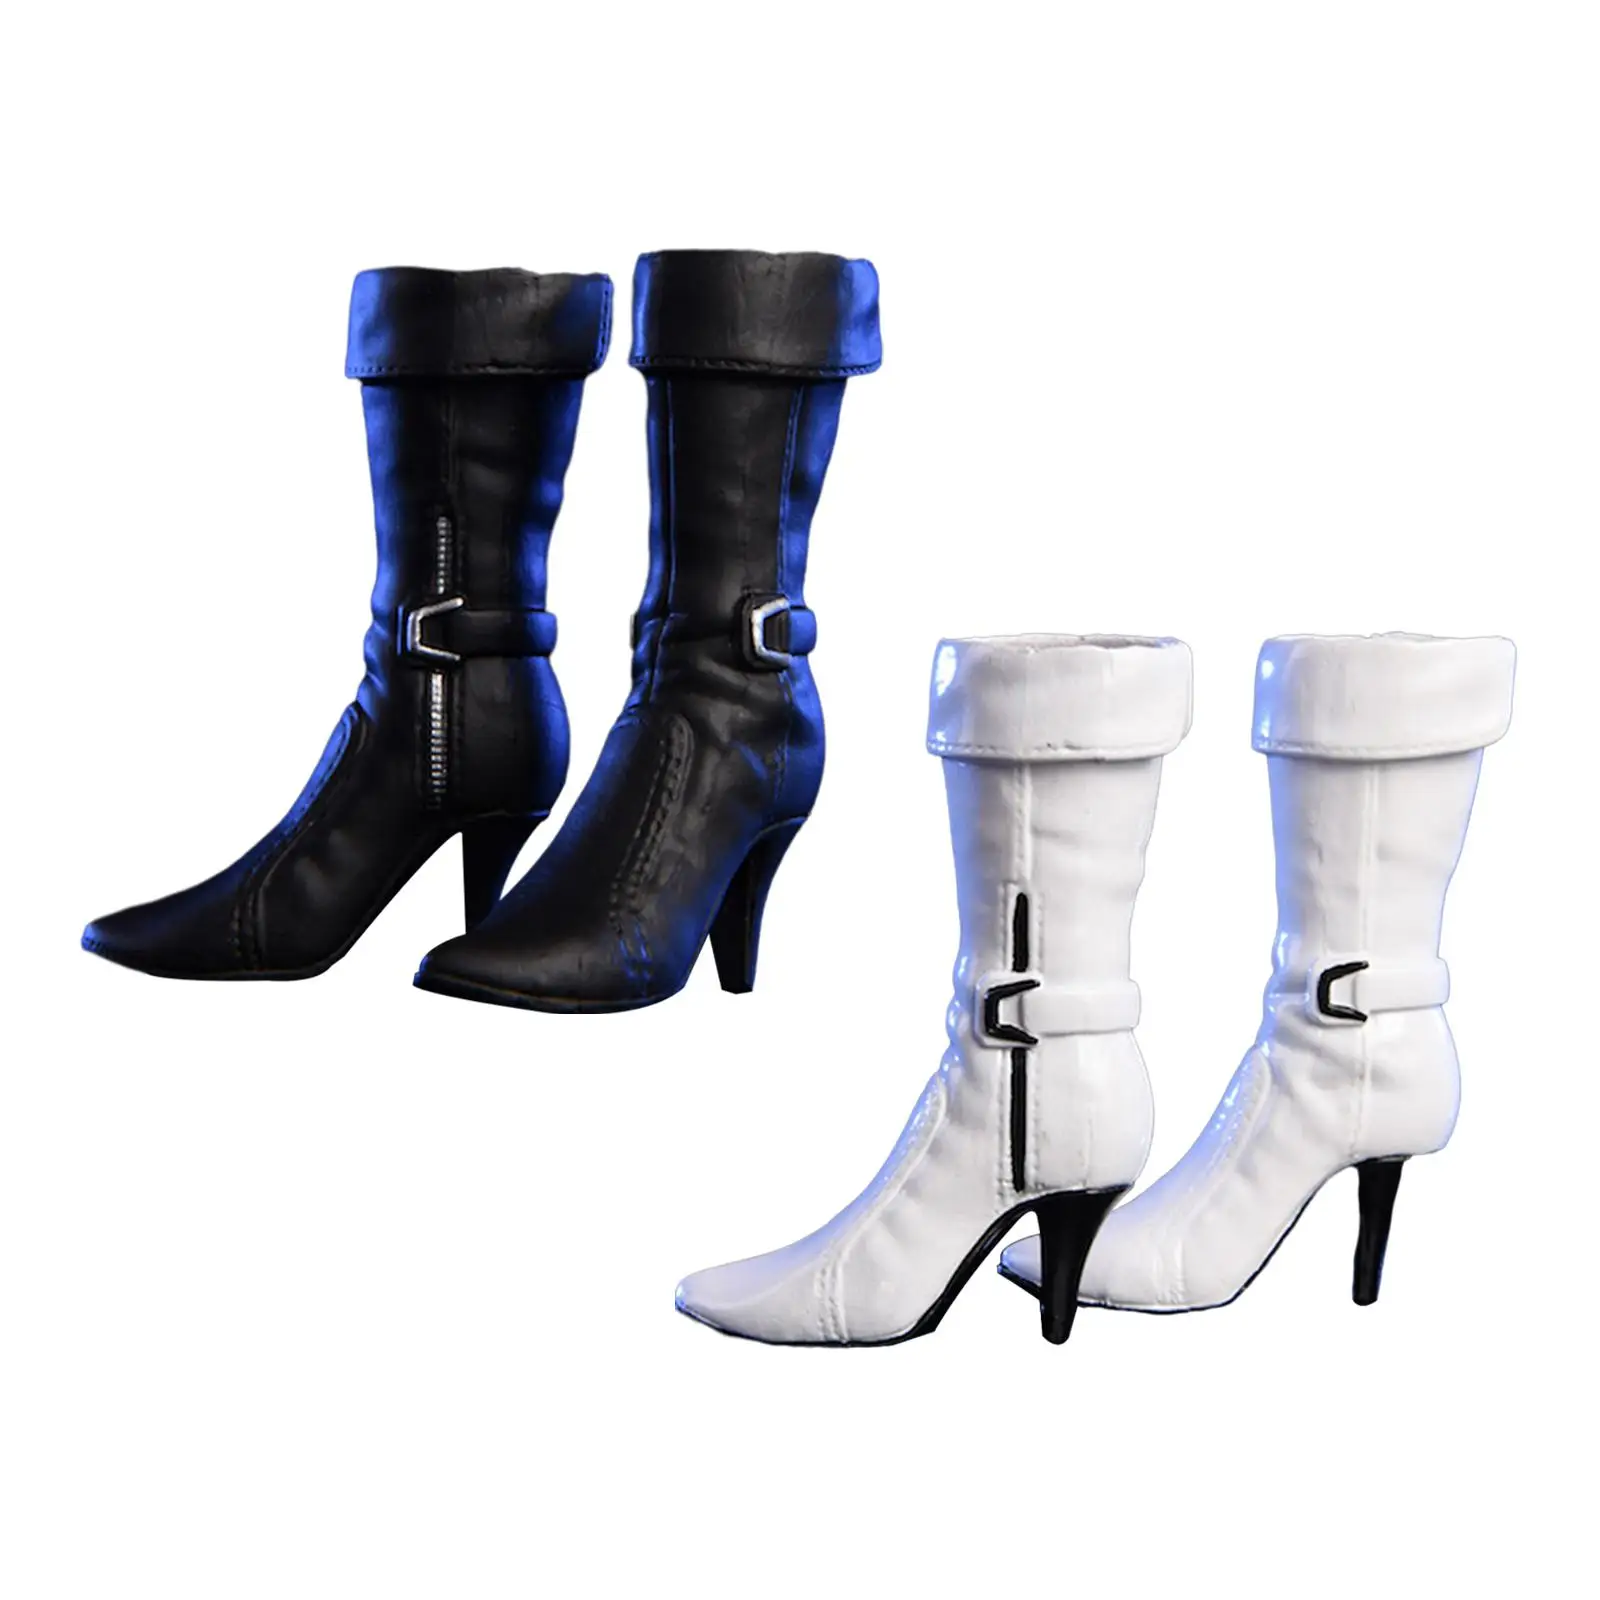 1/6 Scale Figure Shoes Fashion Handmade Outfits PU Leather Doll Shoes Boots for 12 inch Female Action Figure DIY Gift